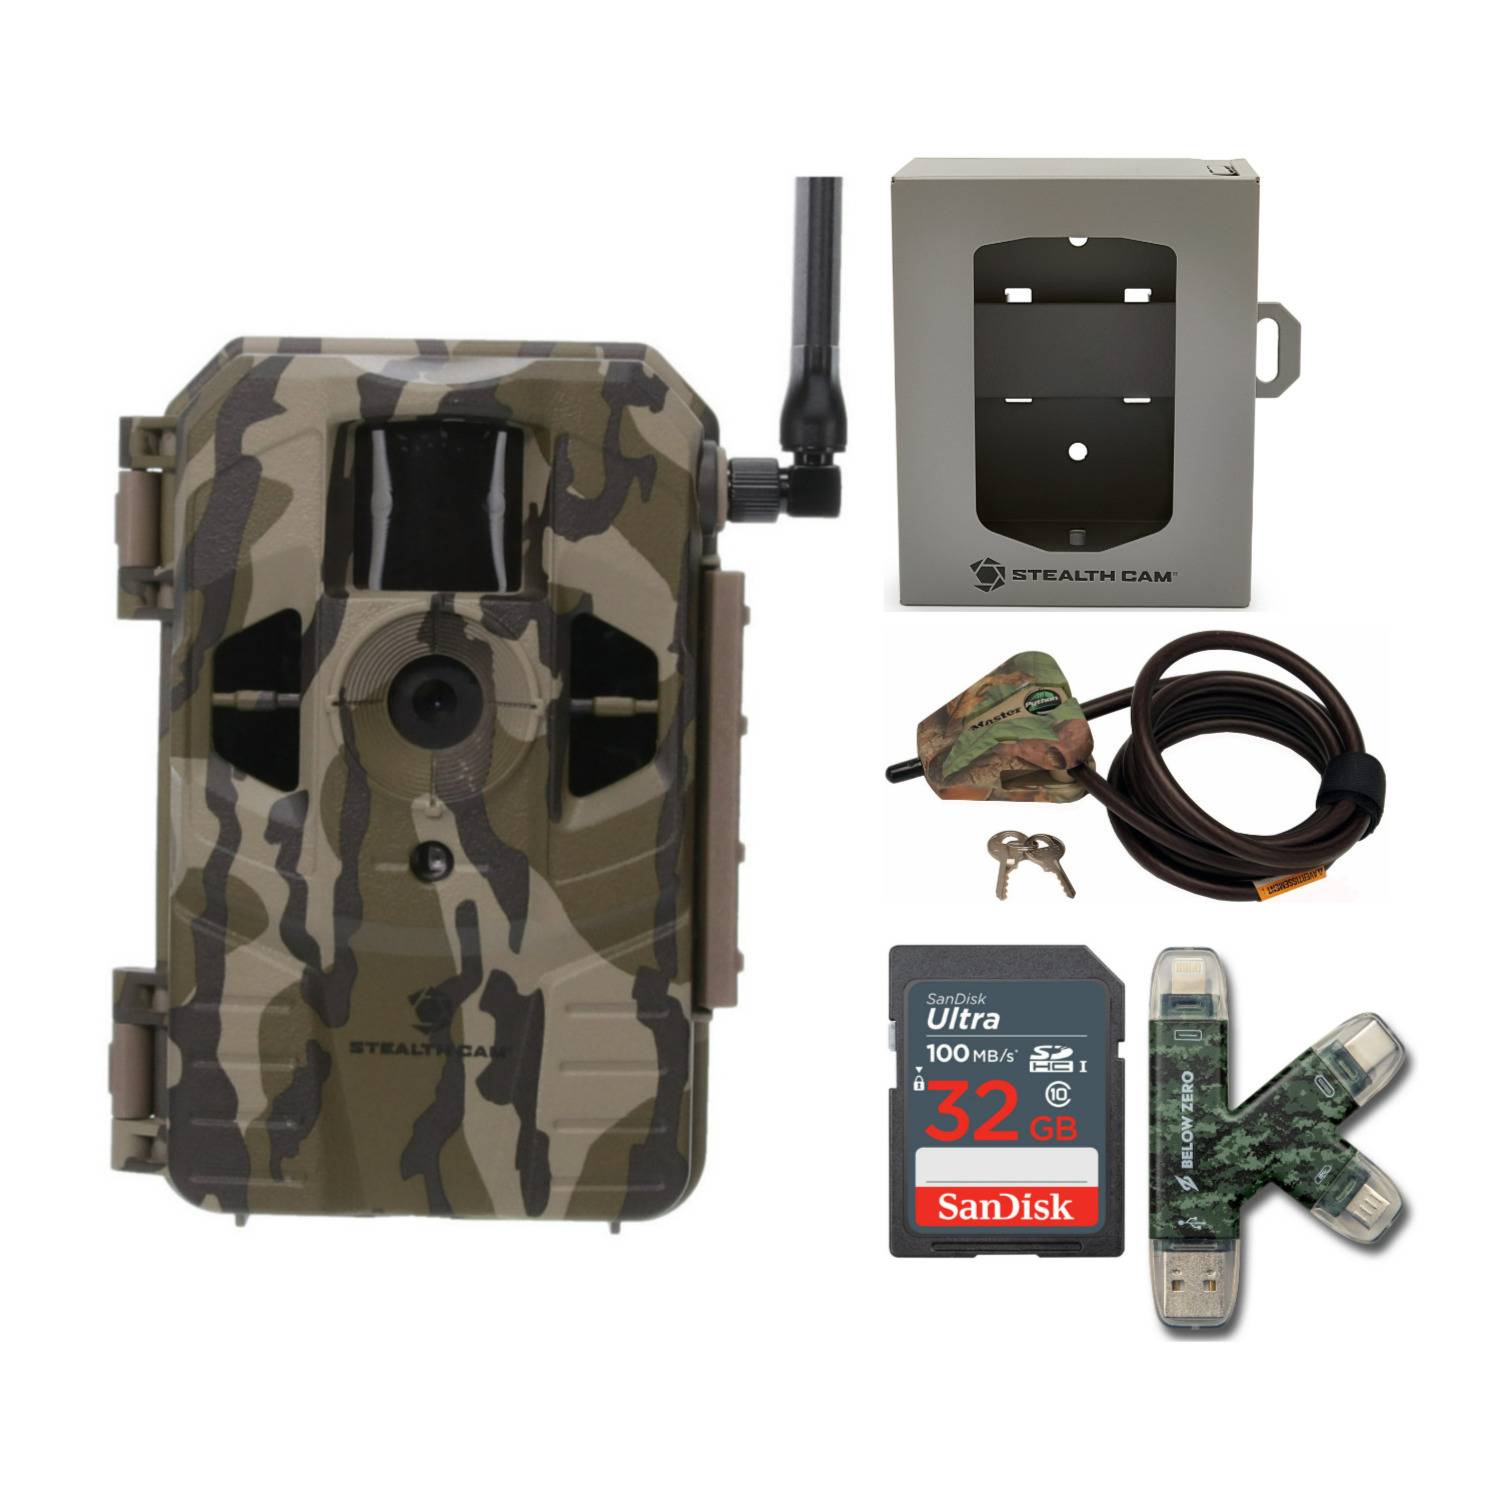 Stealth Cam Connect Cellular Trail Camera (AT&T) with Security Box, Cable and Accessories Bundle